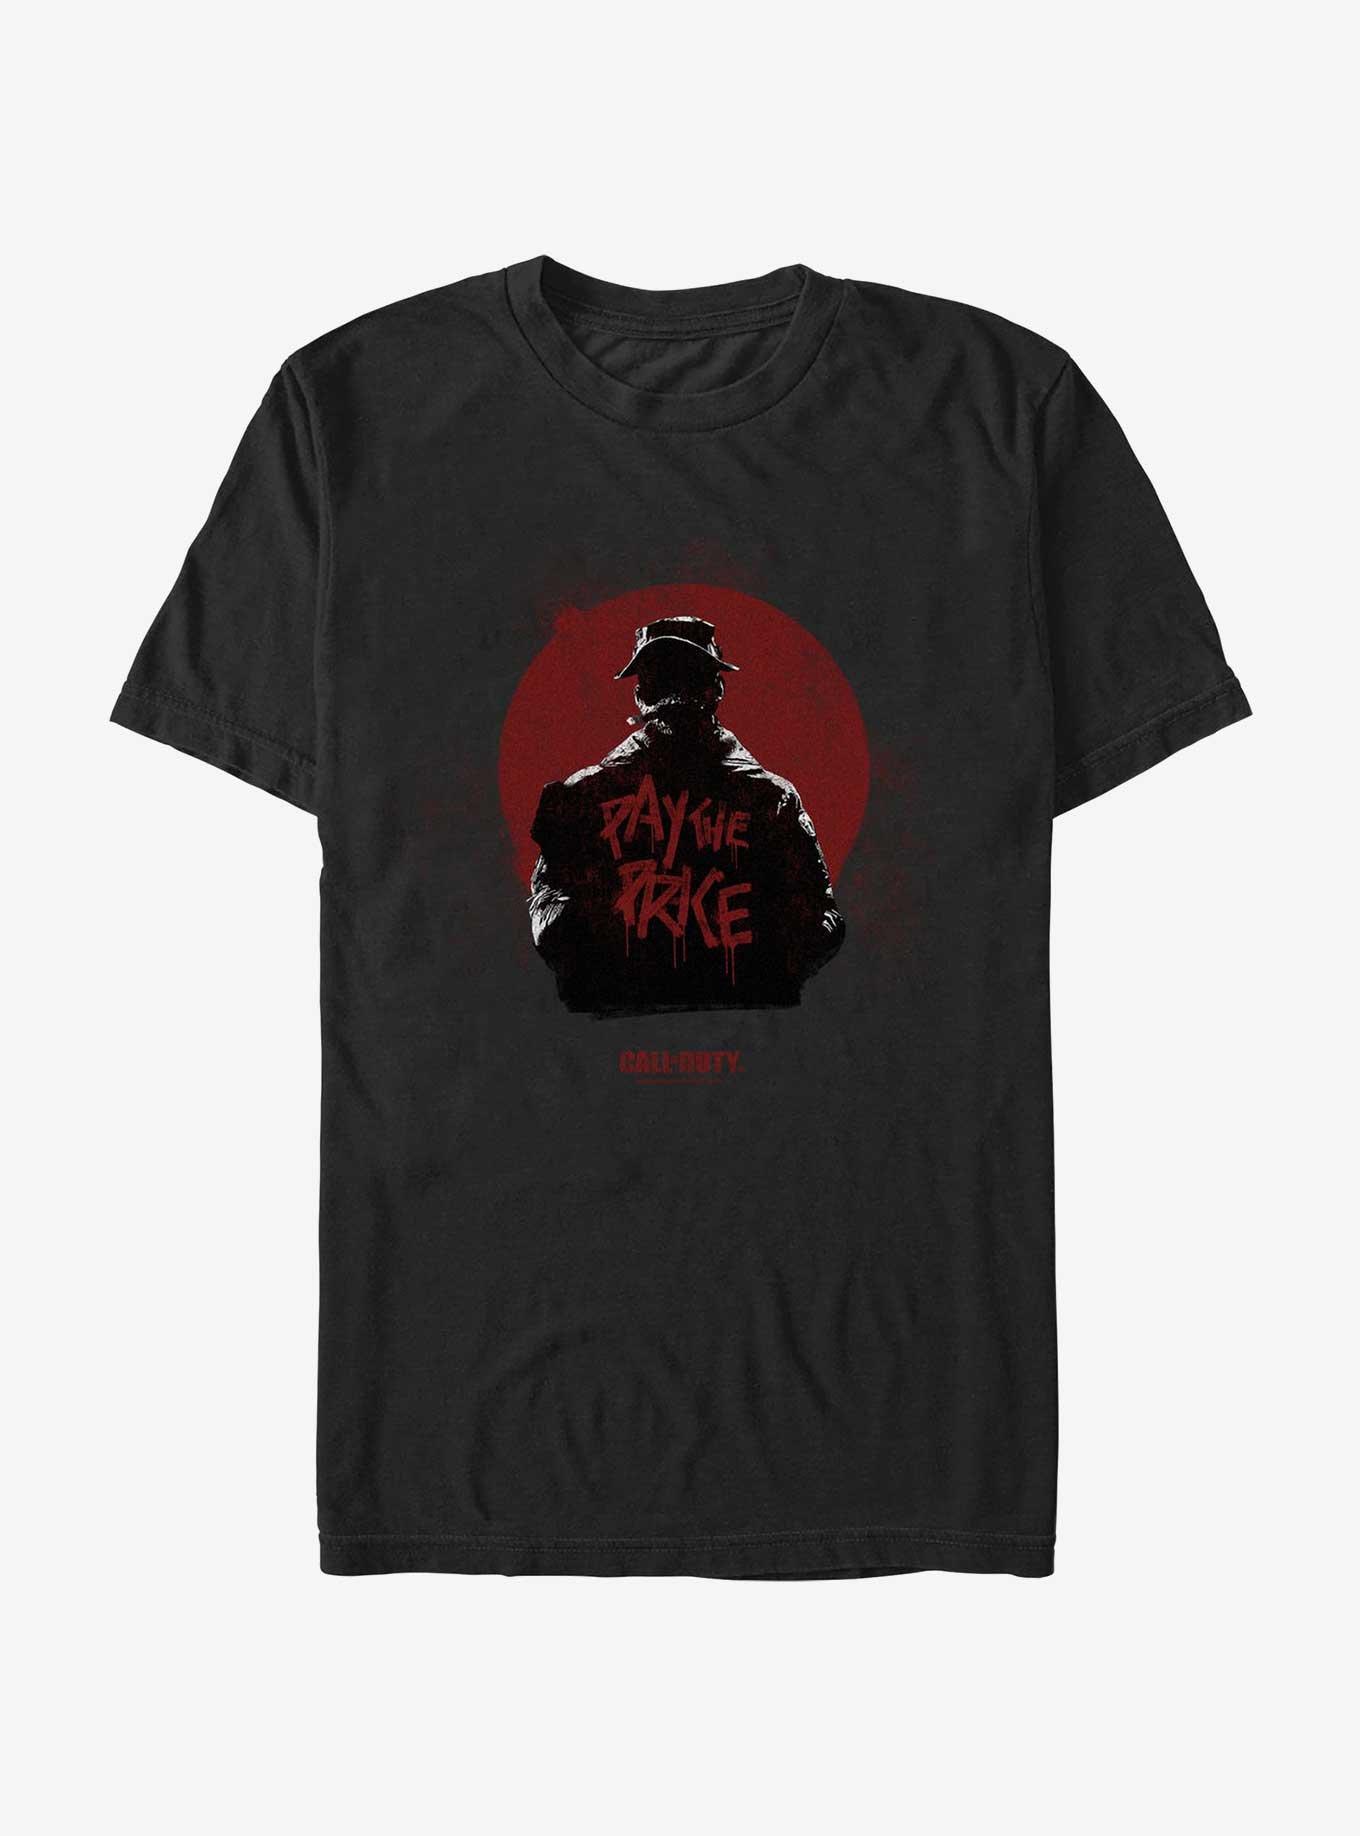 Call of Duty Blood Moon Pay The Price T-Shirt